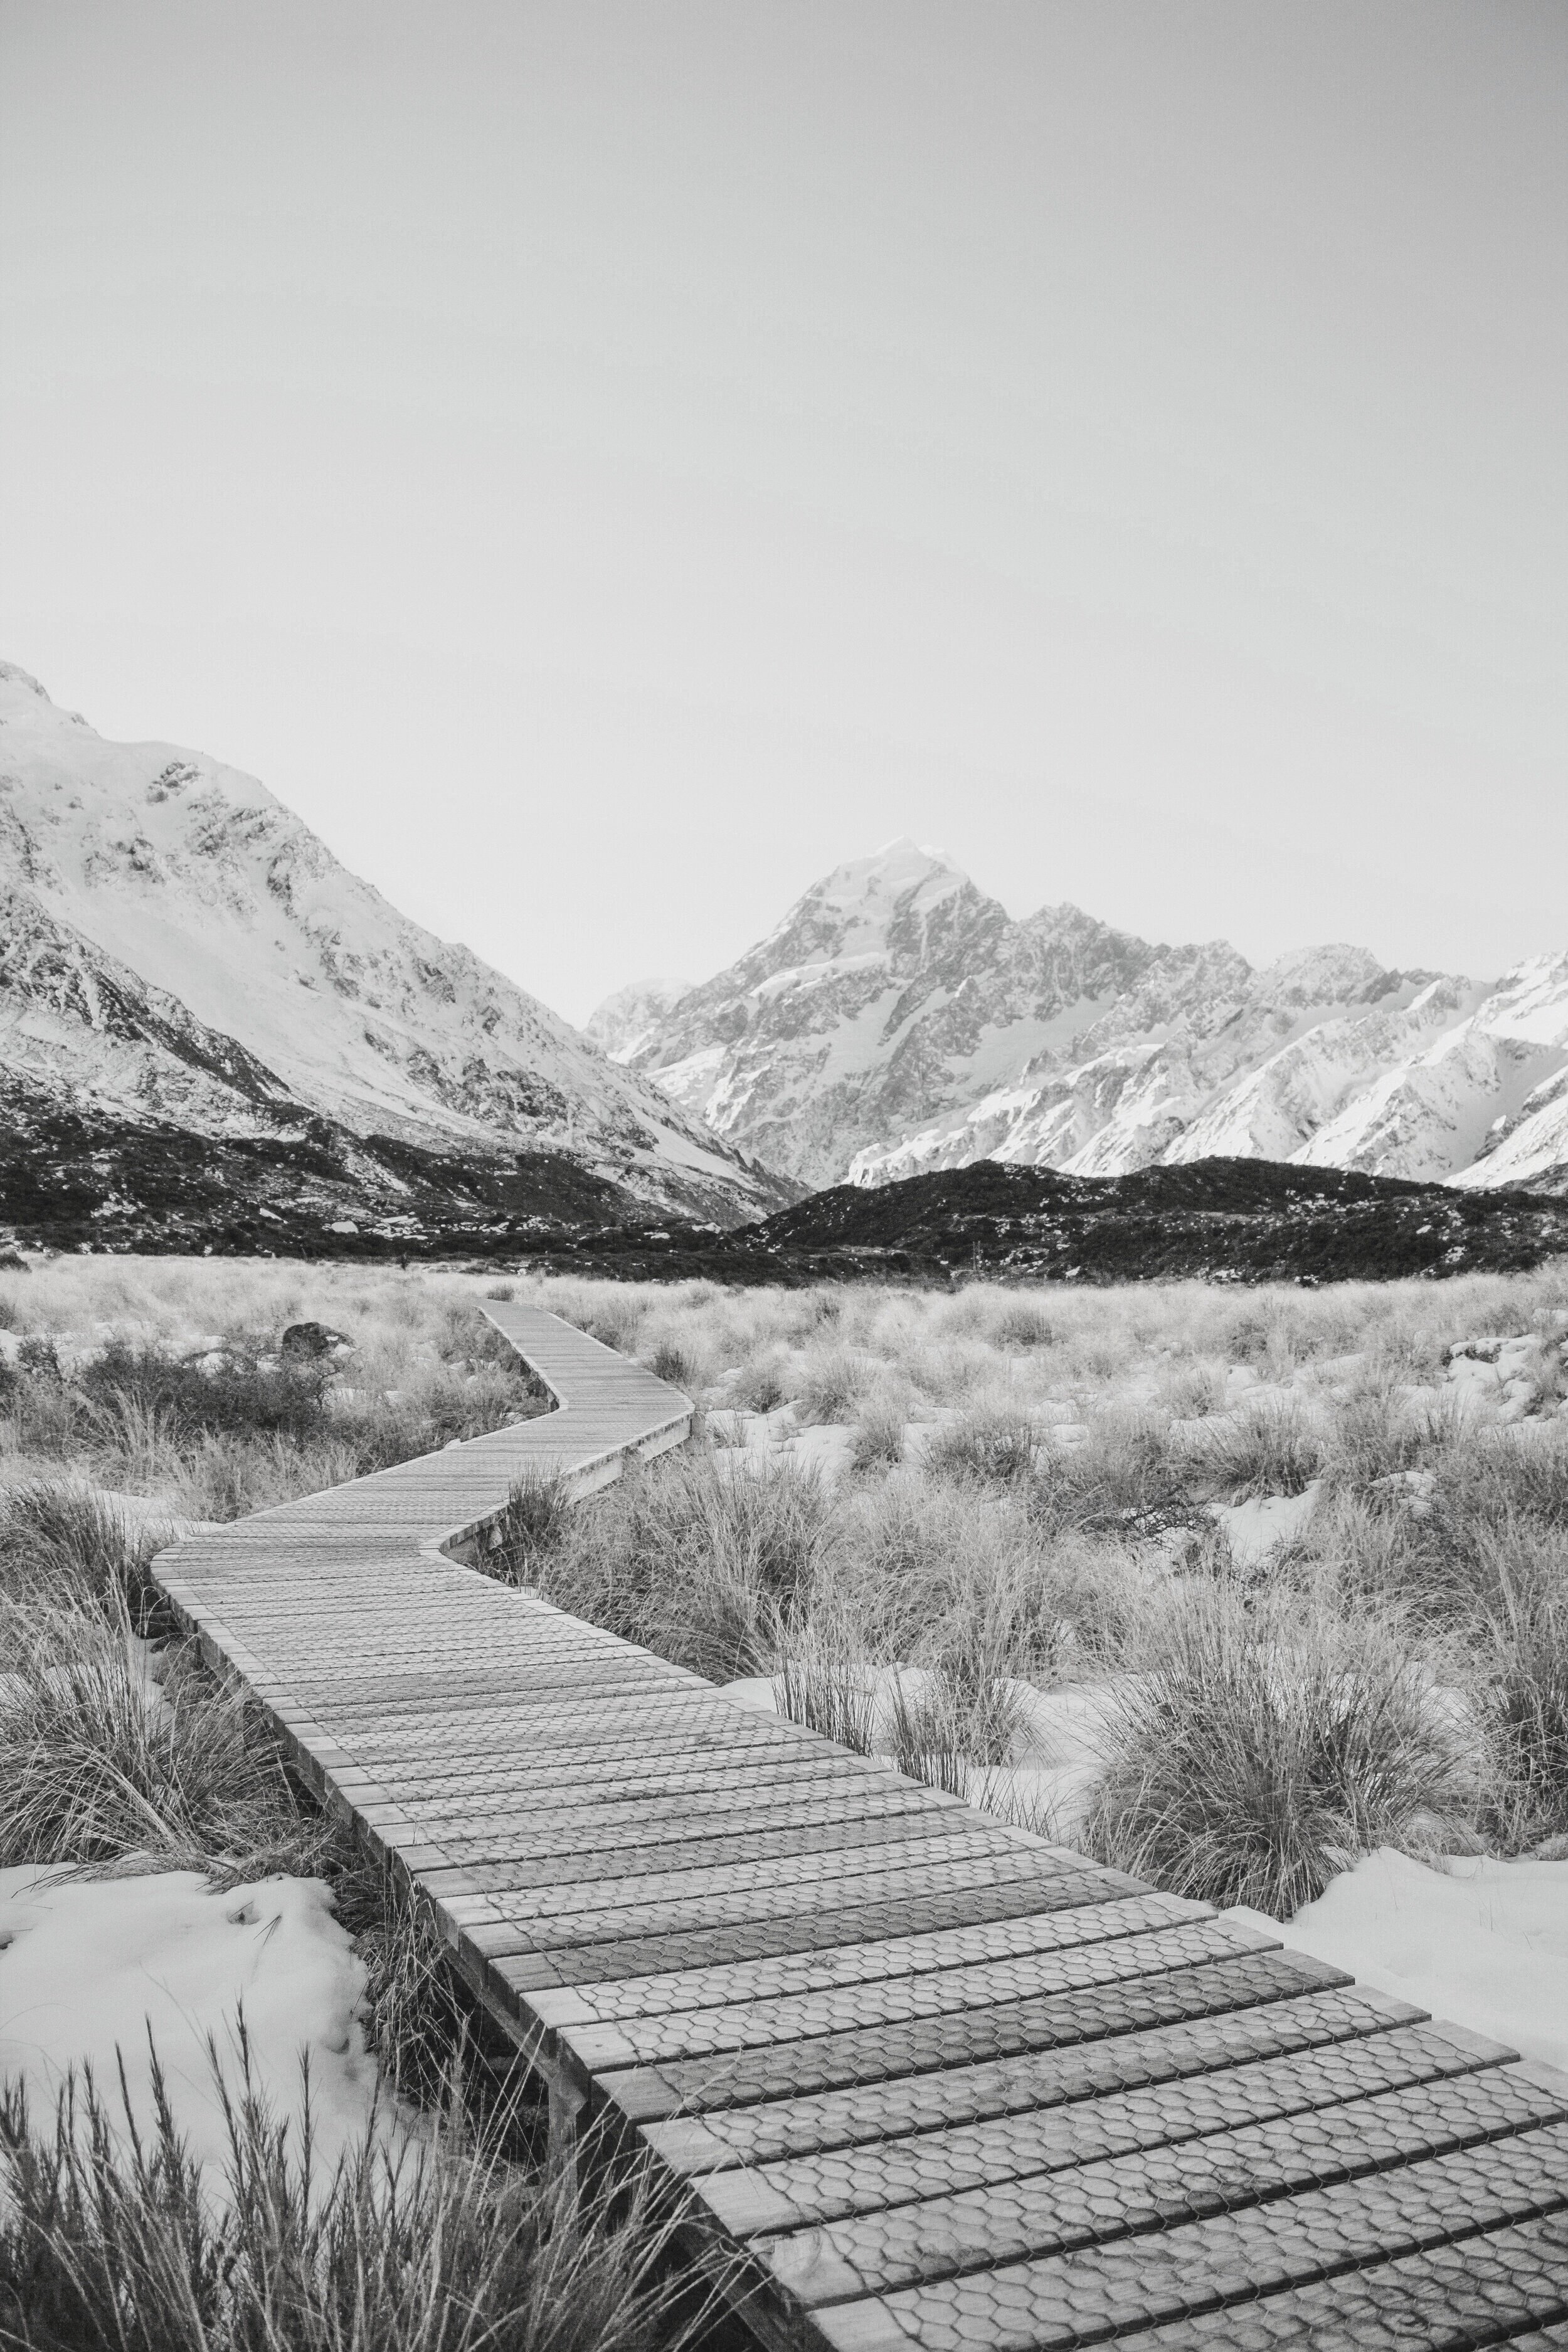 Book a plane to Mount Cook